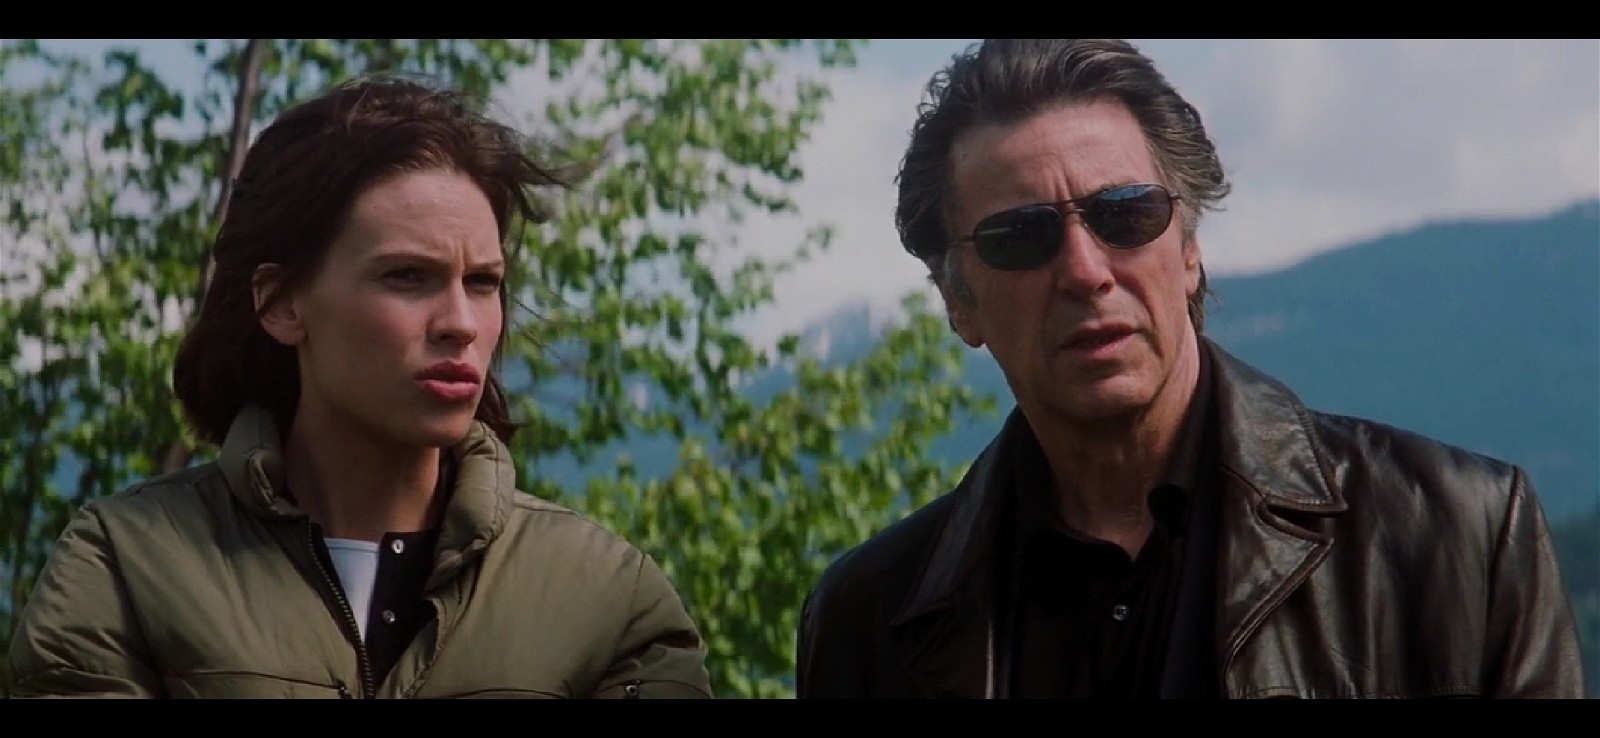 Al Pacino and Hilary Swank in Insomnia